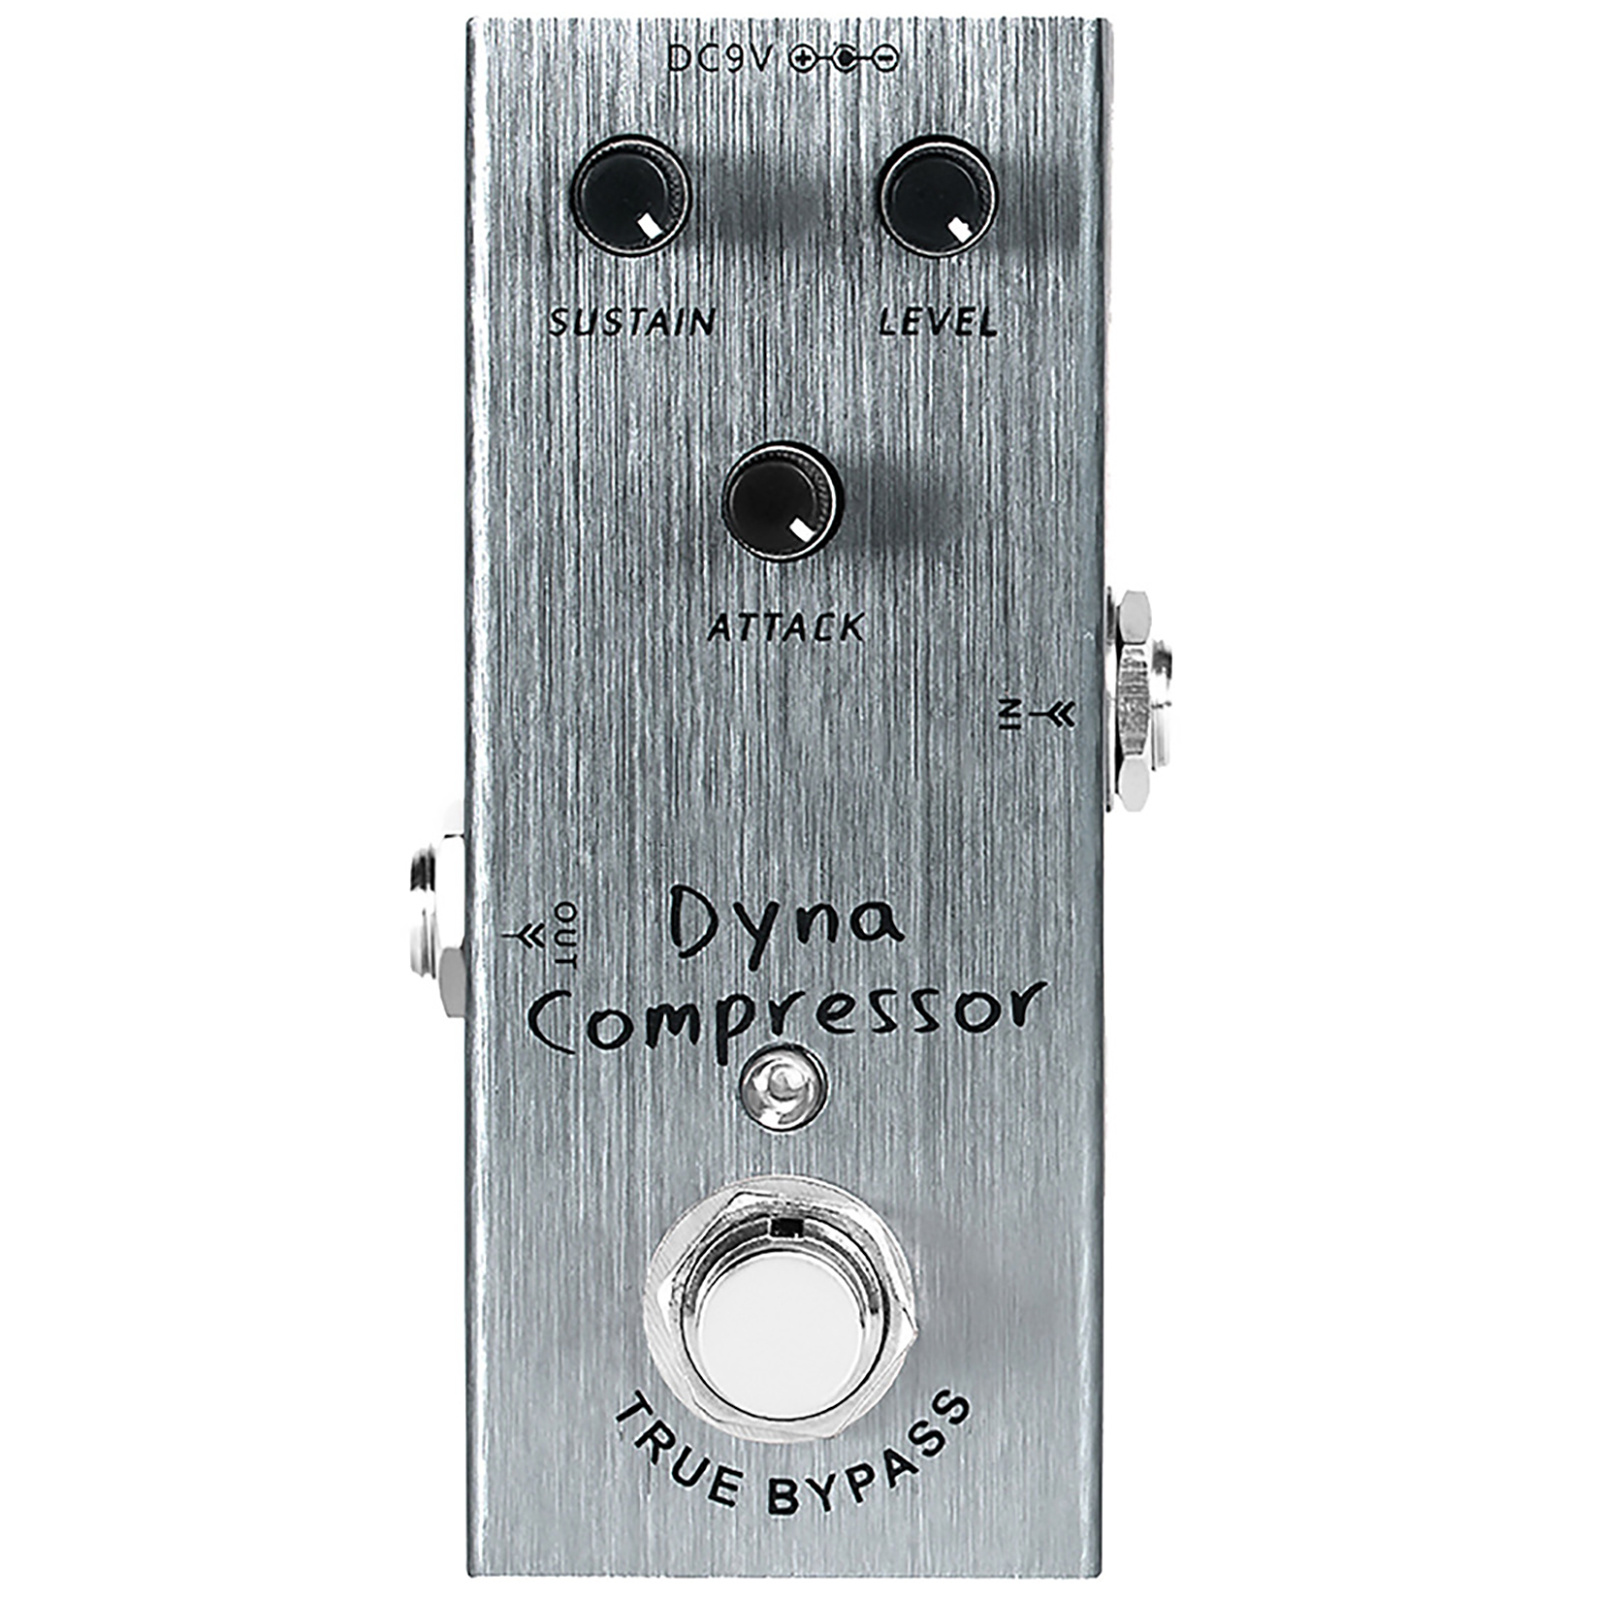 Dyna Compressor Overdrive Pedal Overdrive Volume Tone Knob Effect Pedals With Steel Metal Shell Electric Guitar Effects